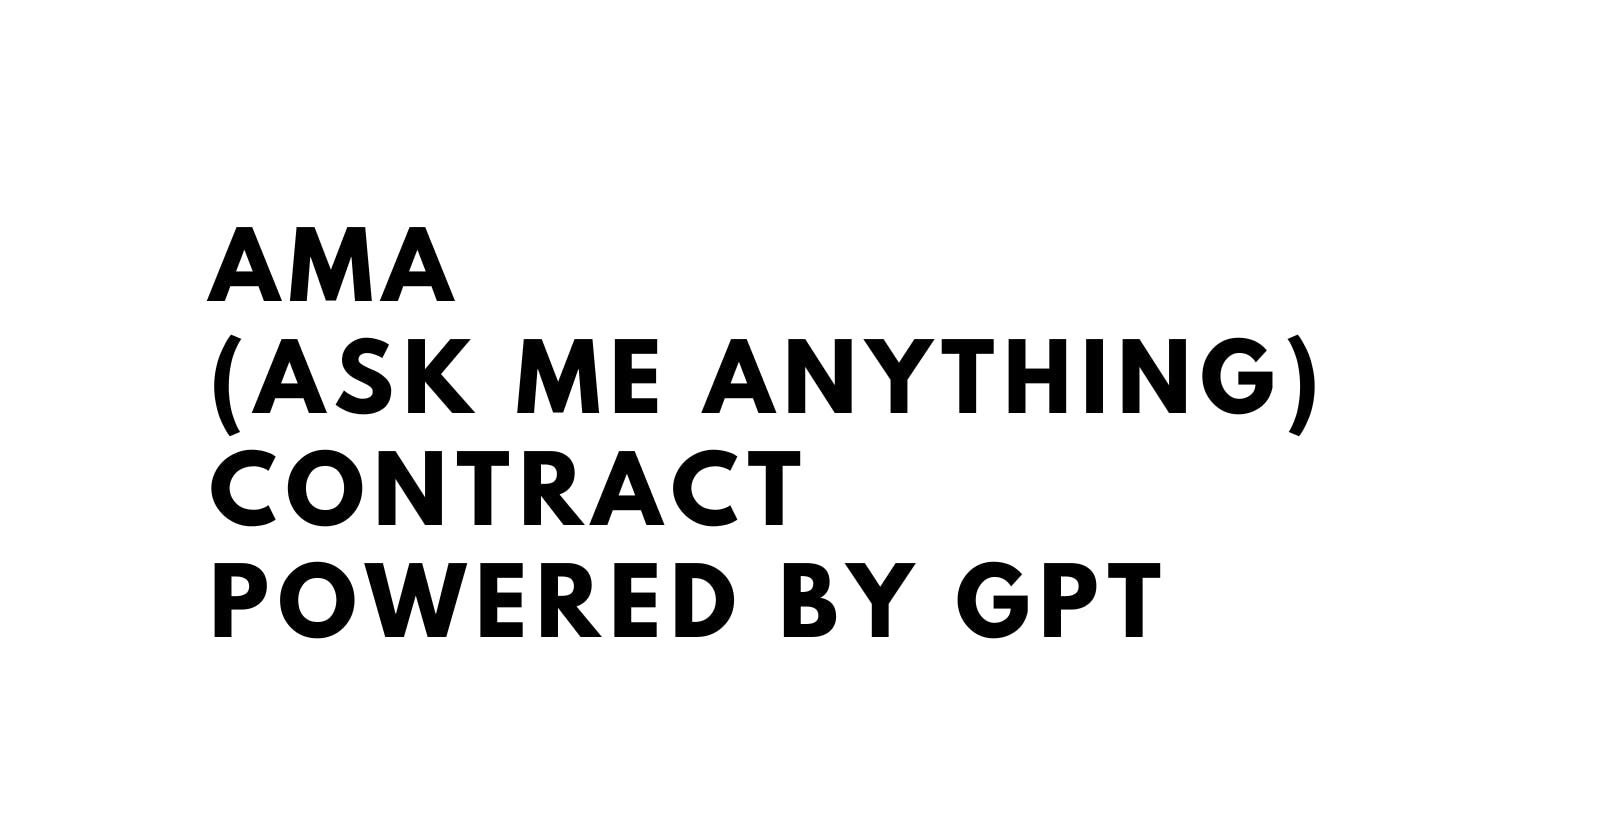 How to Create an App that Answers Questions About Your Contract Using Embeddings and GPT